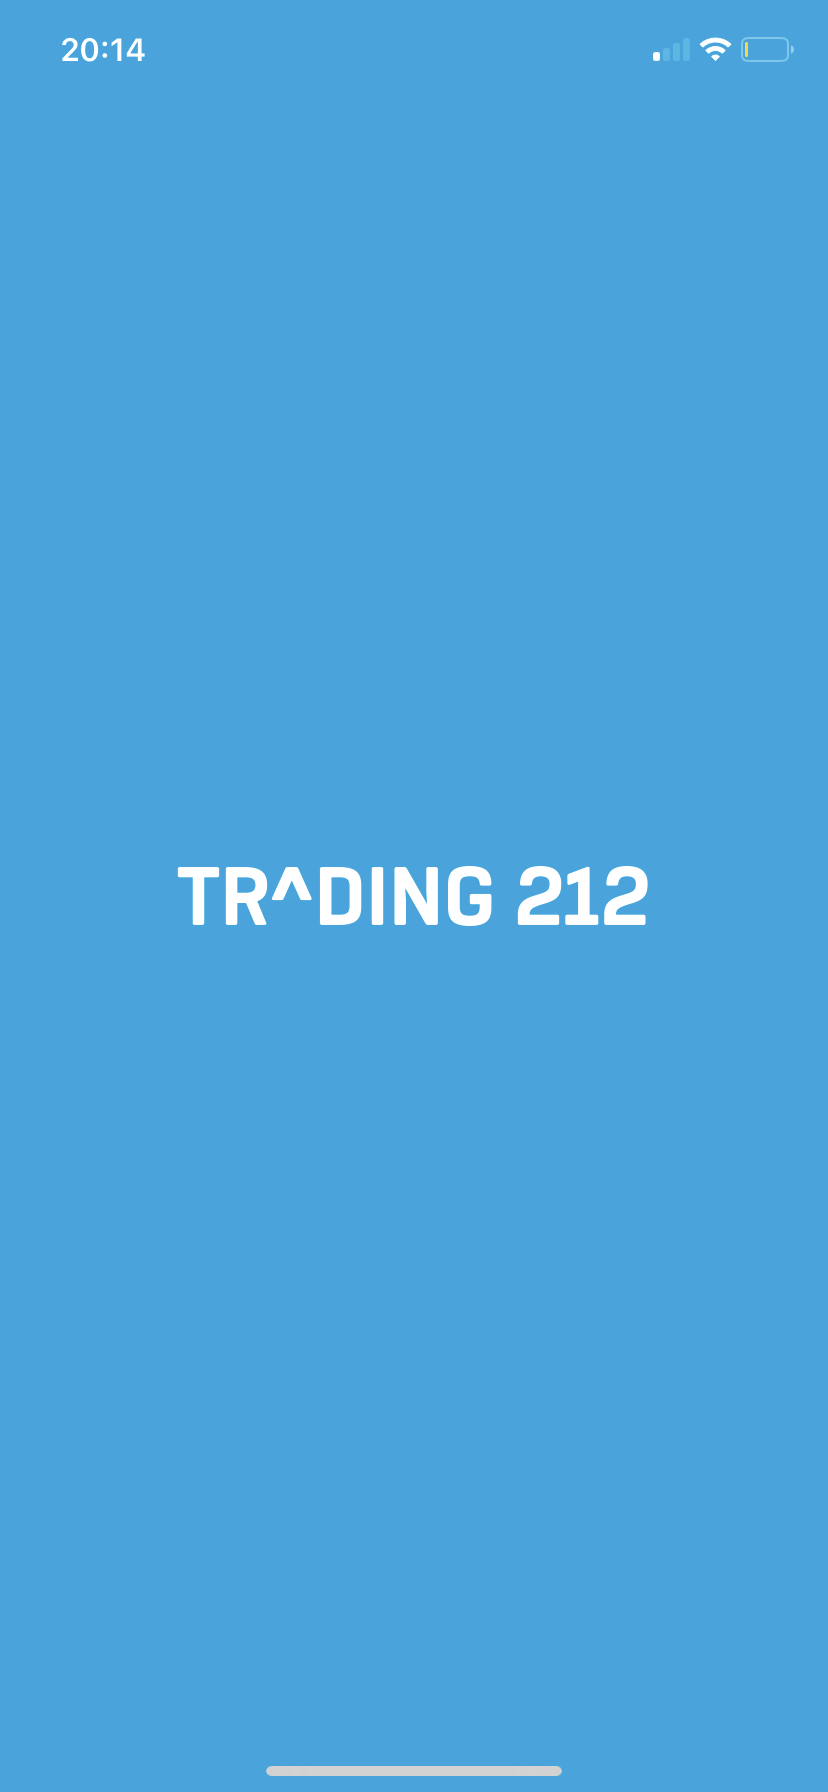 Trading 212 - Get up to £100 Free Shares thumbnail